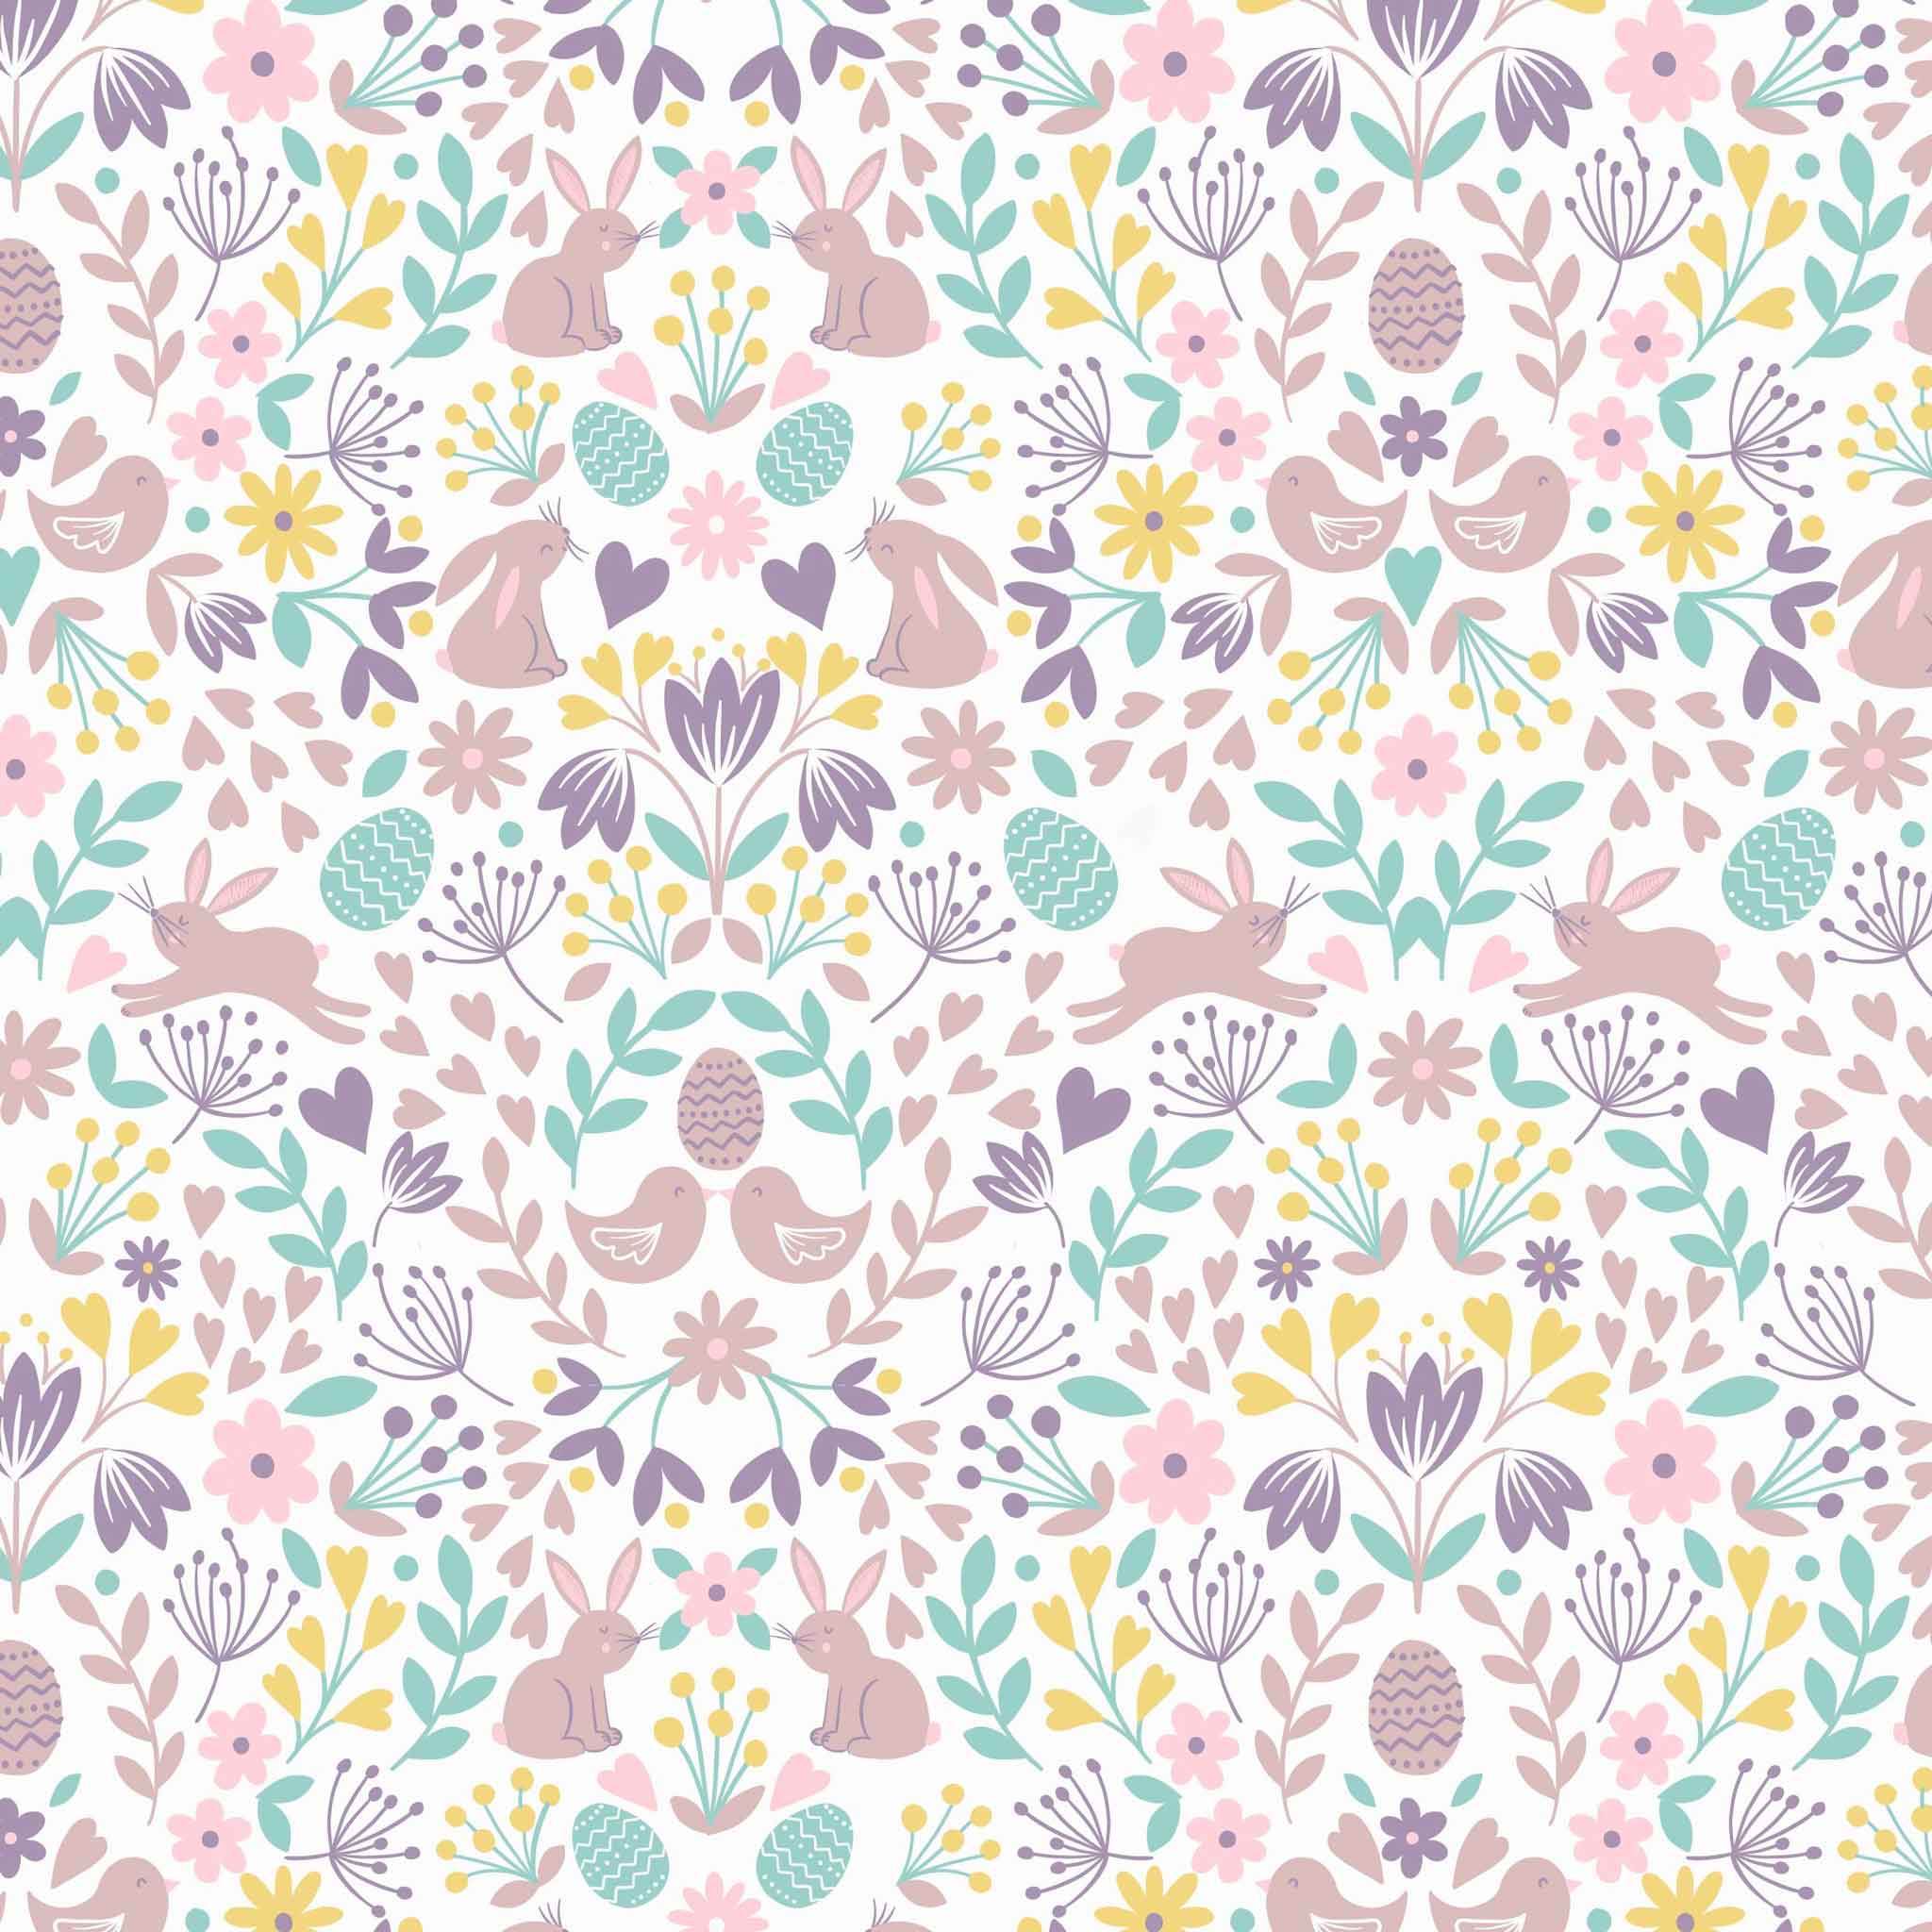 Mirrored Bunny Chicks on Cream Cotton Fabric Lewis and Irene A591.1 - Spring Treats